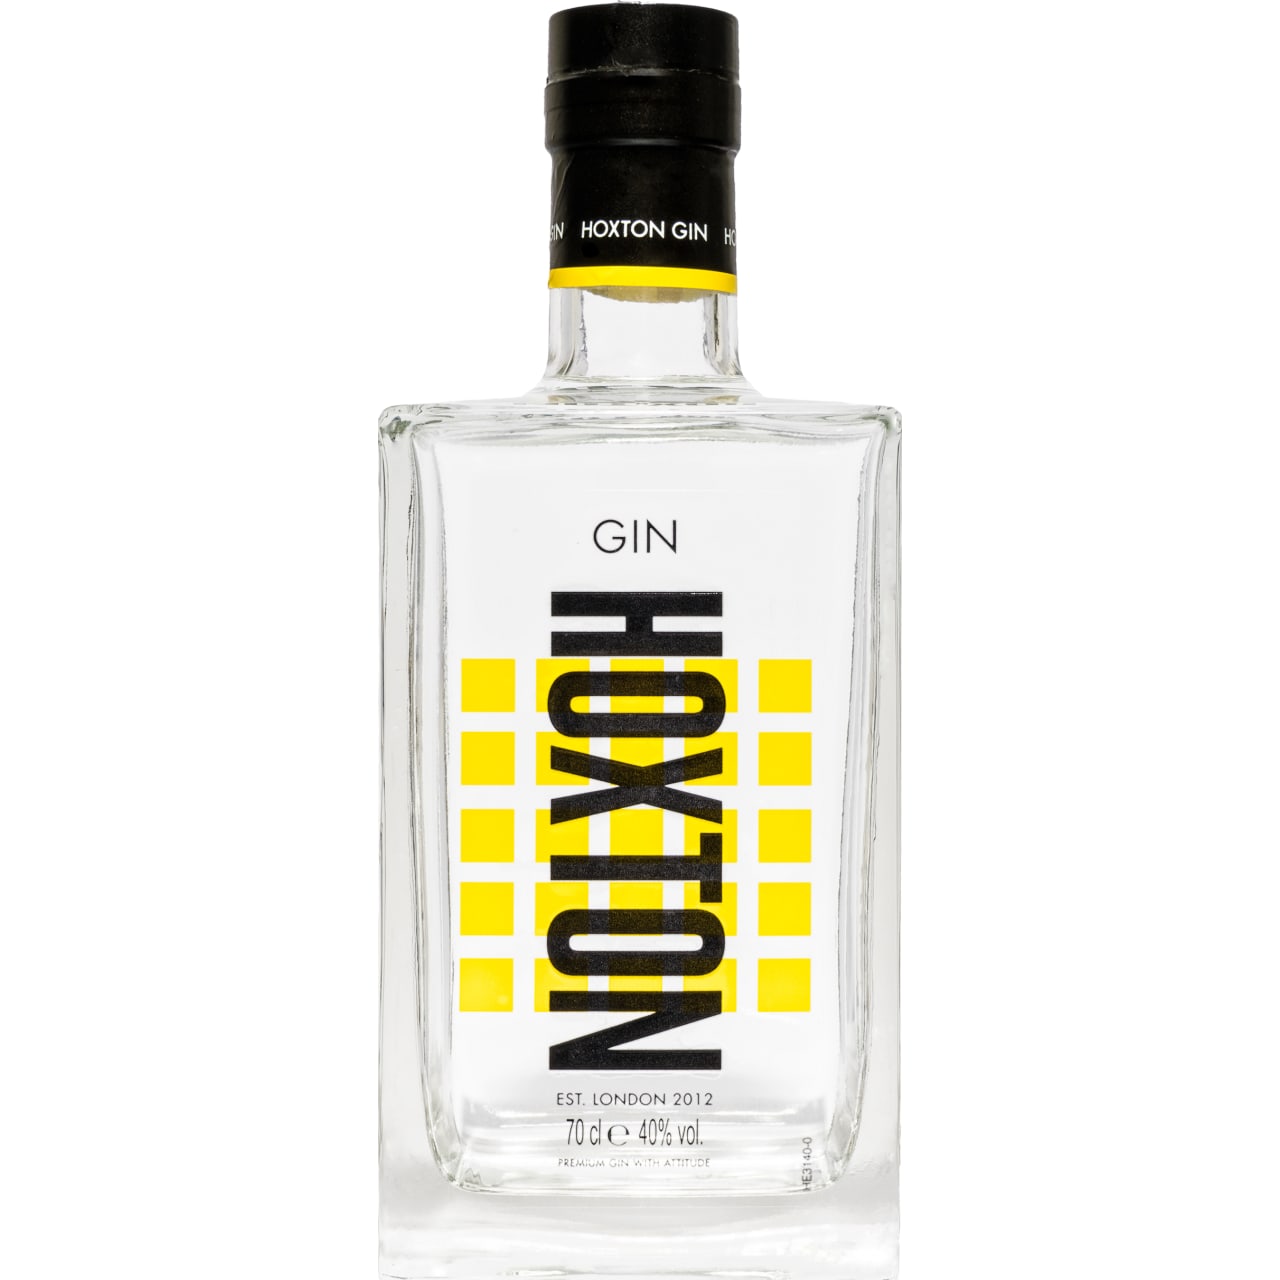 Hoxton gin deliberately defies all gin convention, using the most imaginative and inventive selection of botanicals. This results in possibly the most refreshing of gins. Coconut and grapefruit play an intriguing game on the palate, taking it in turns to come to the fore, with refreshing grapefruit taking the final bow.